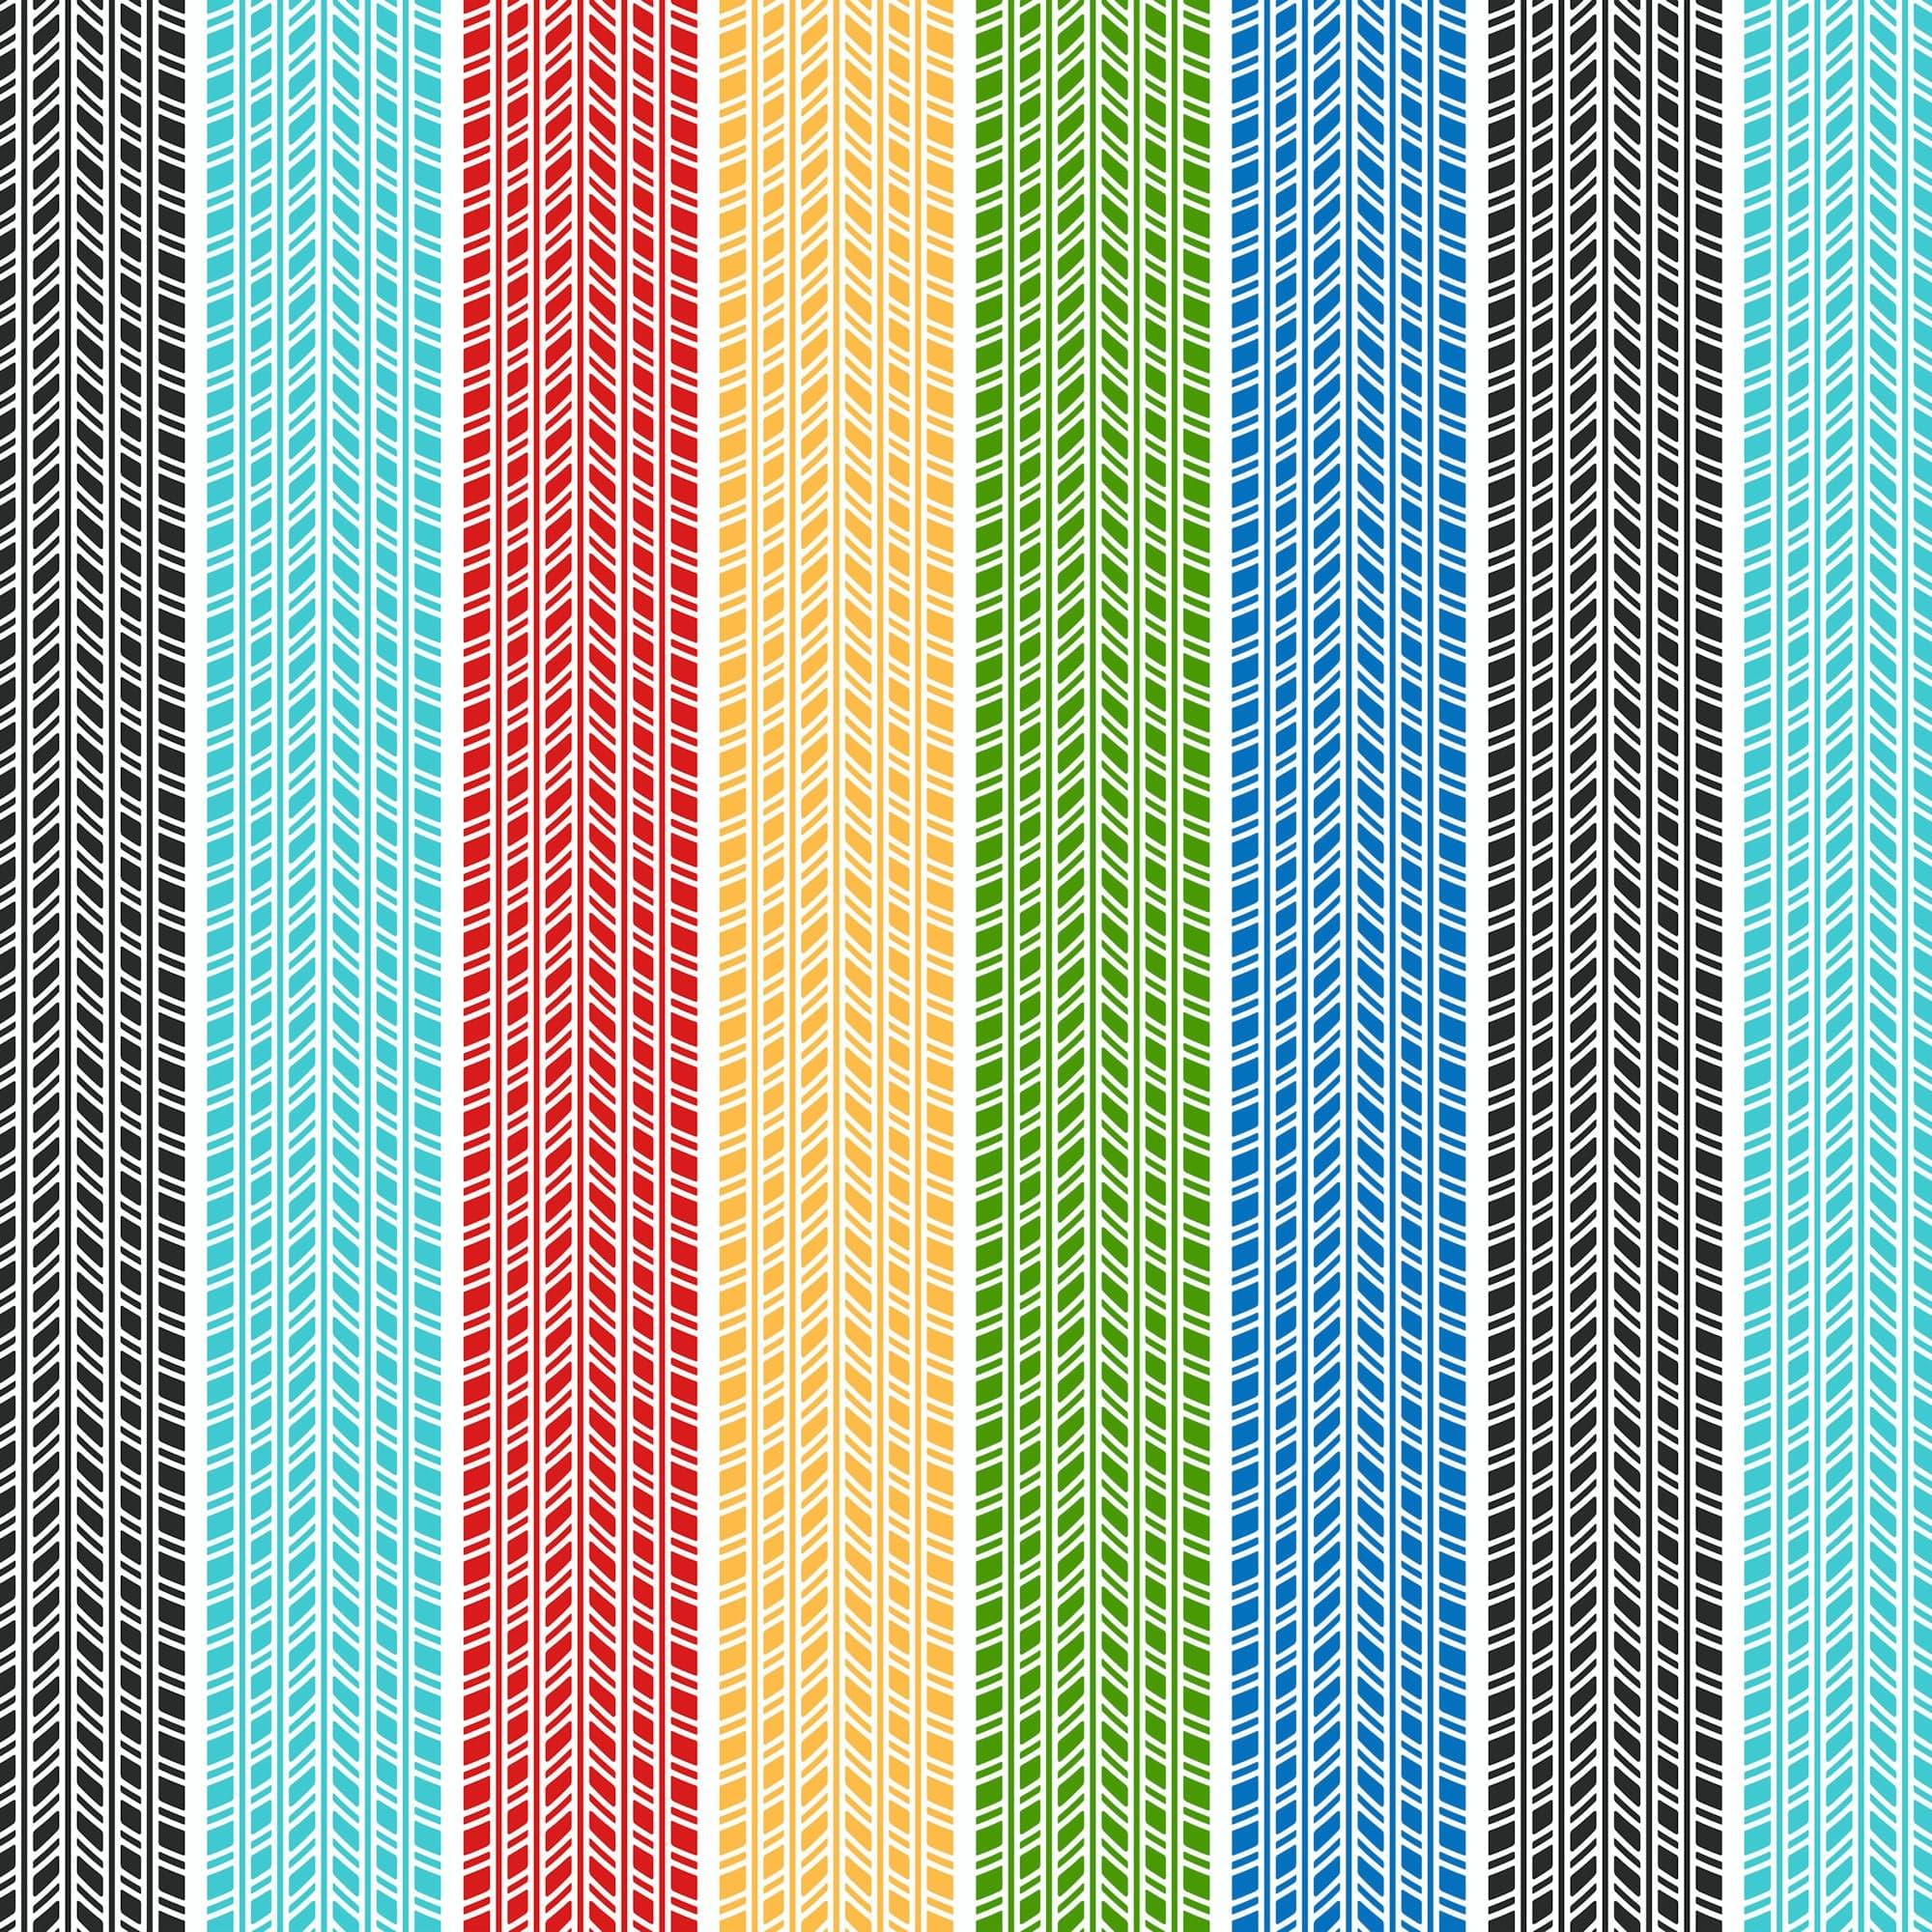 Rev Your Engine Collection Rev 'Em Up 12 x 12 Double-Sided Scrapbook Paper by SSC Designs - Scrapbook Supply Companies